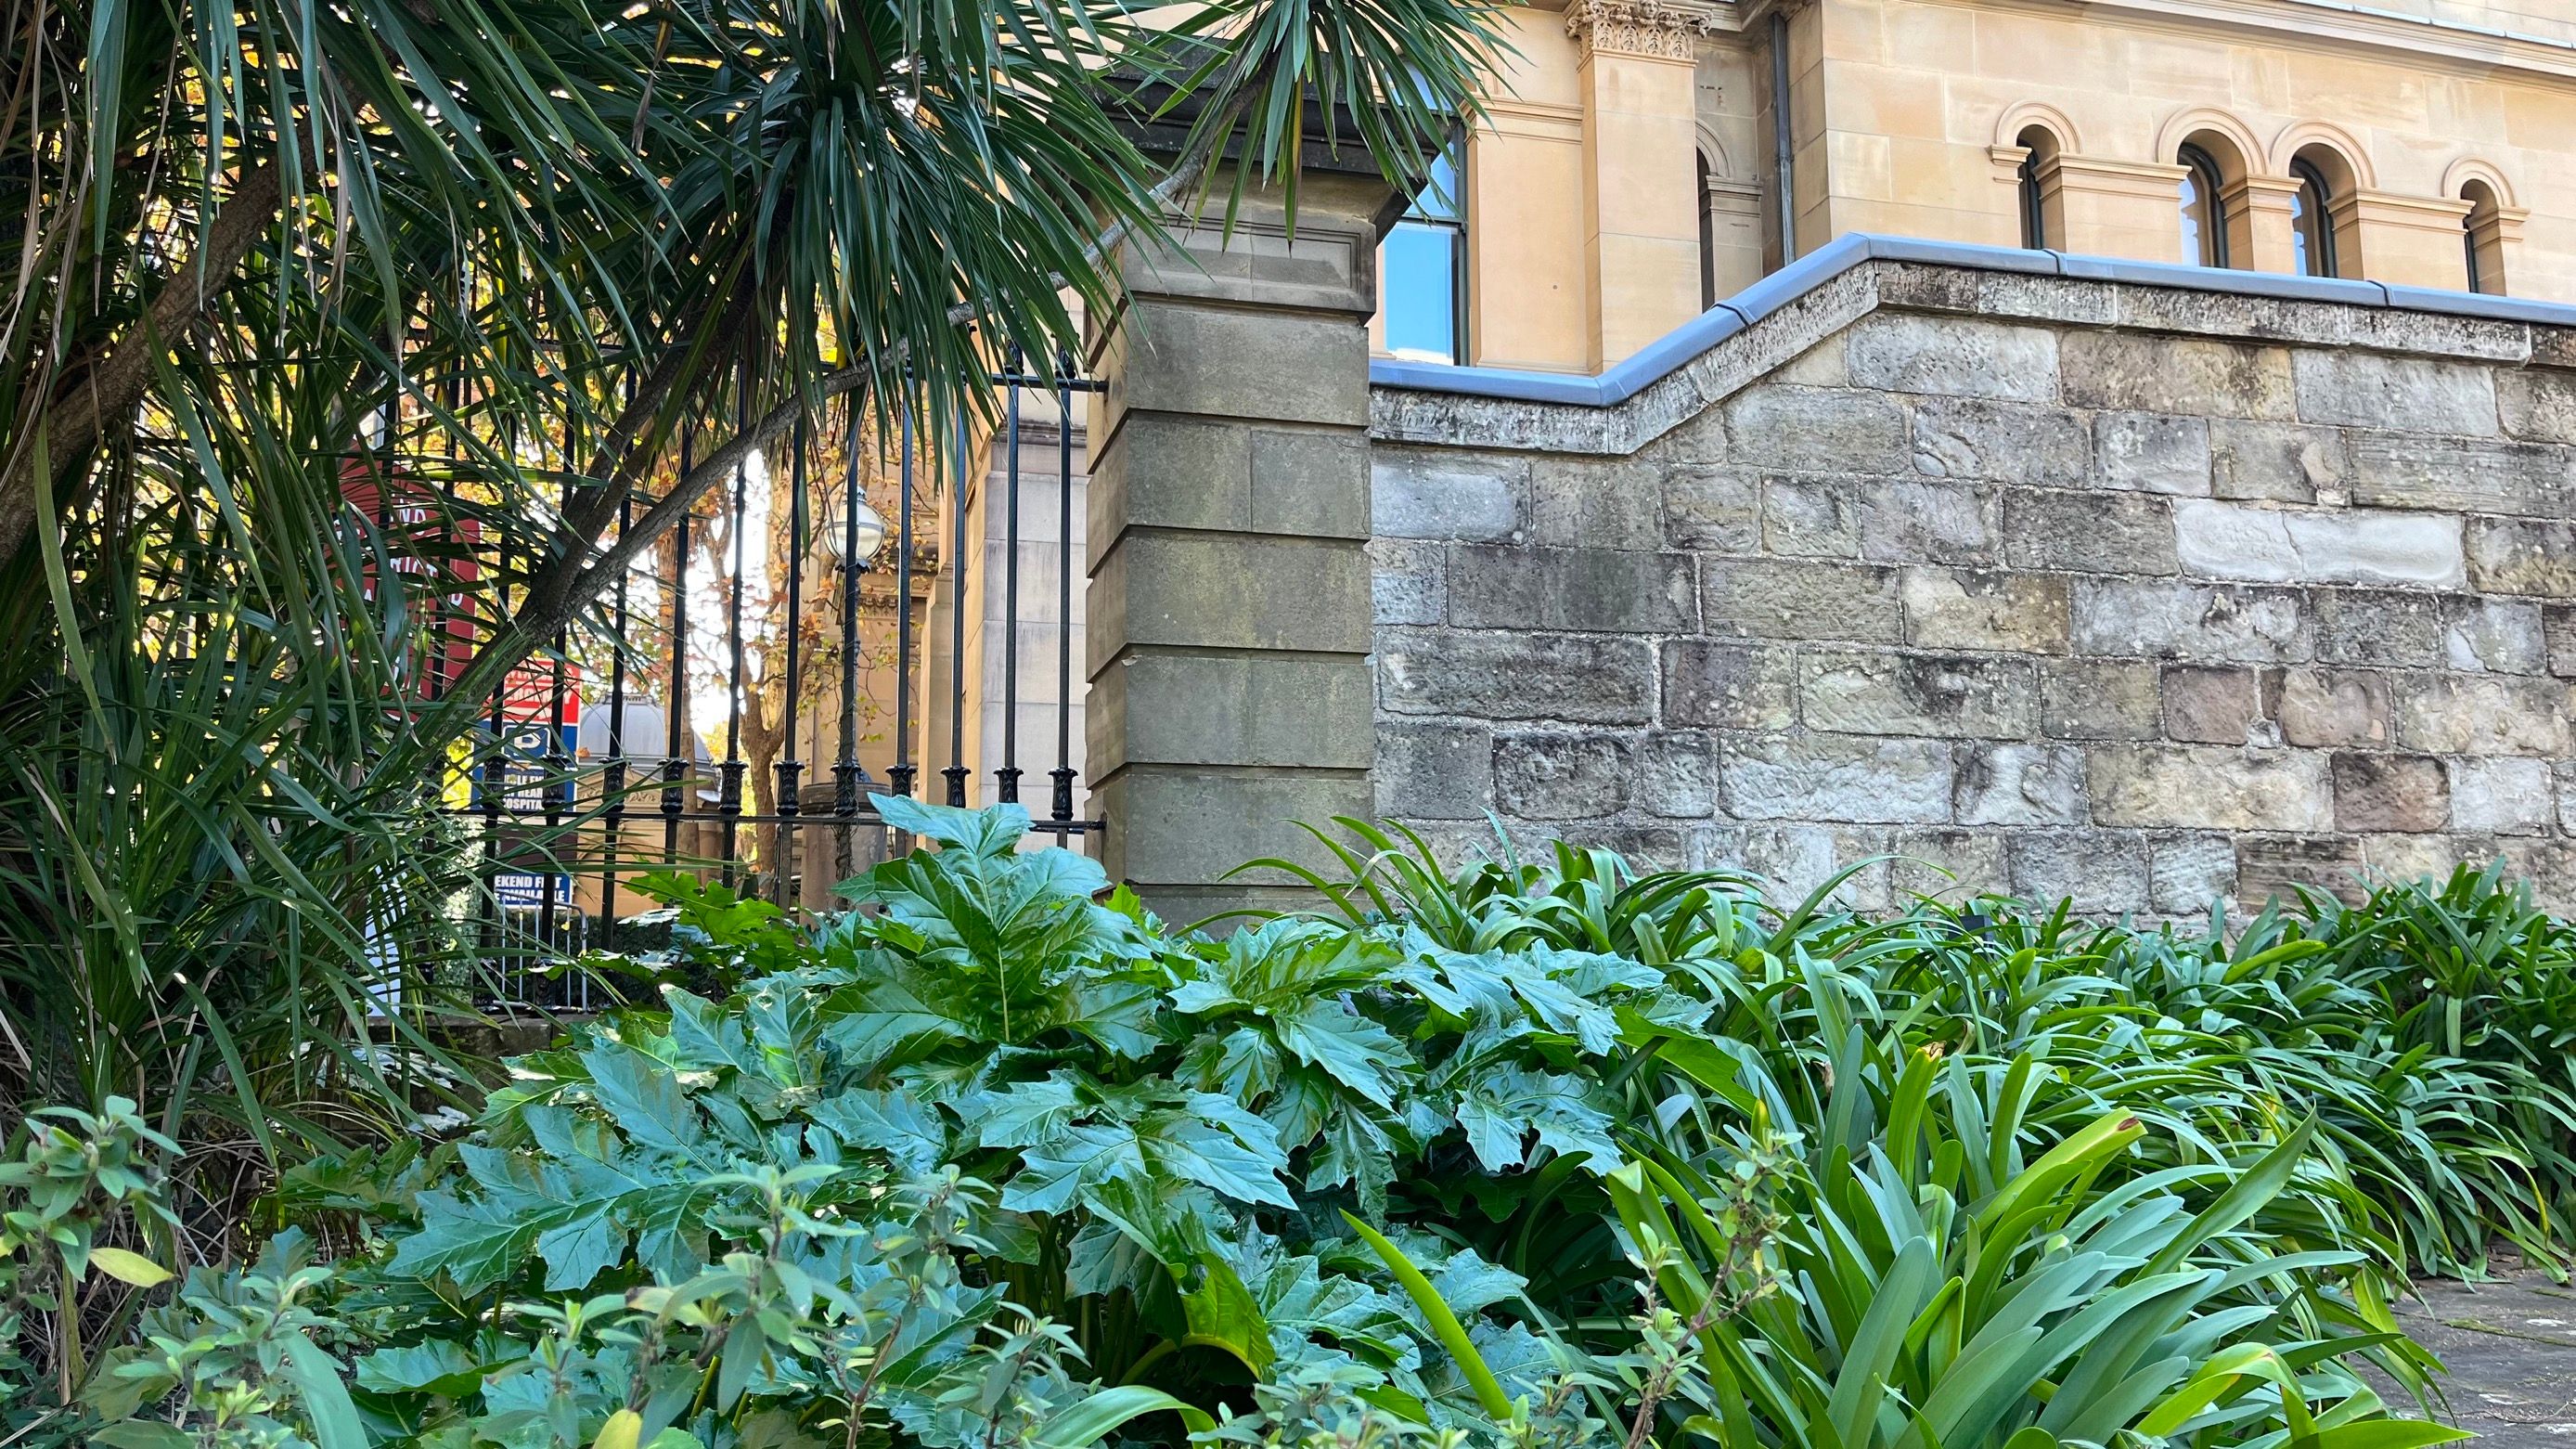 Plants against a sandstone wall in the front garden of The Mint.